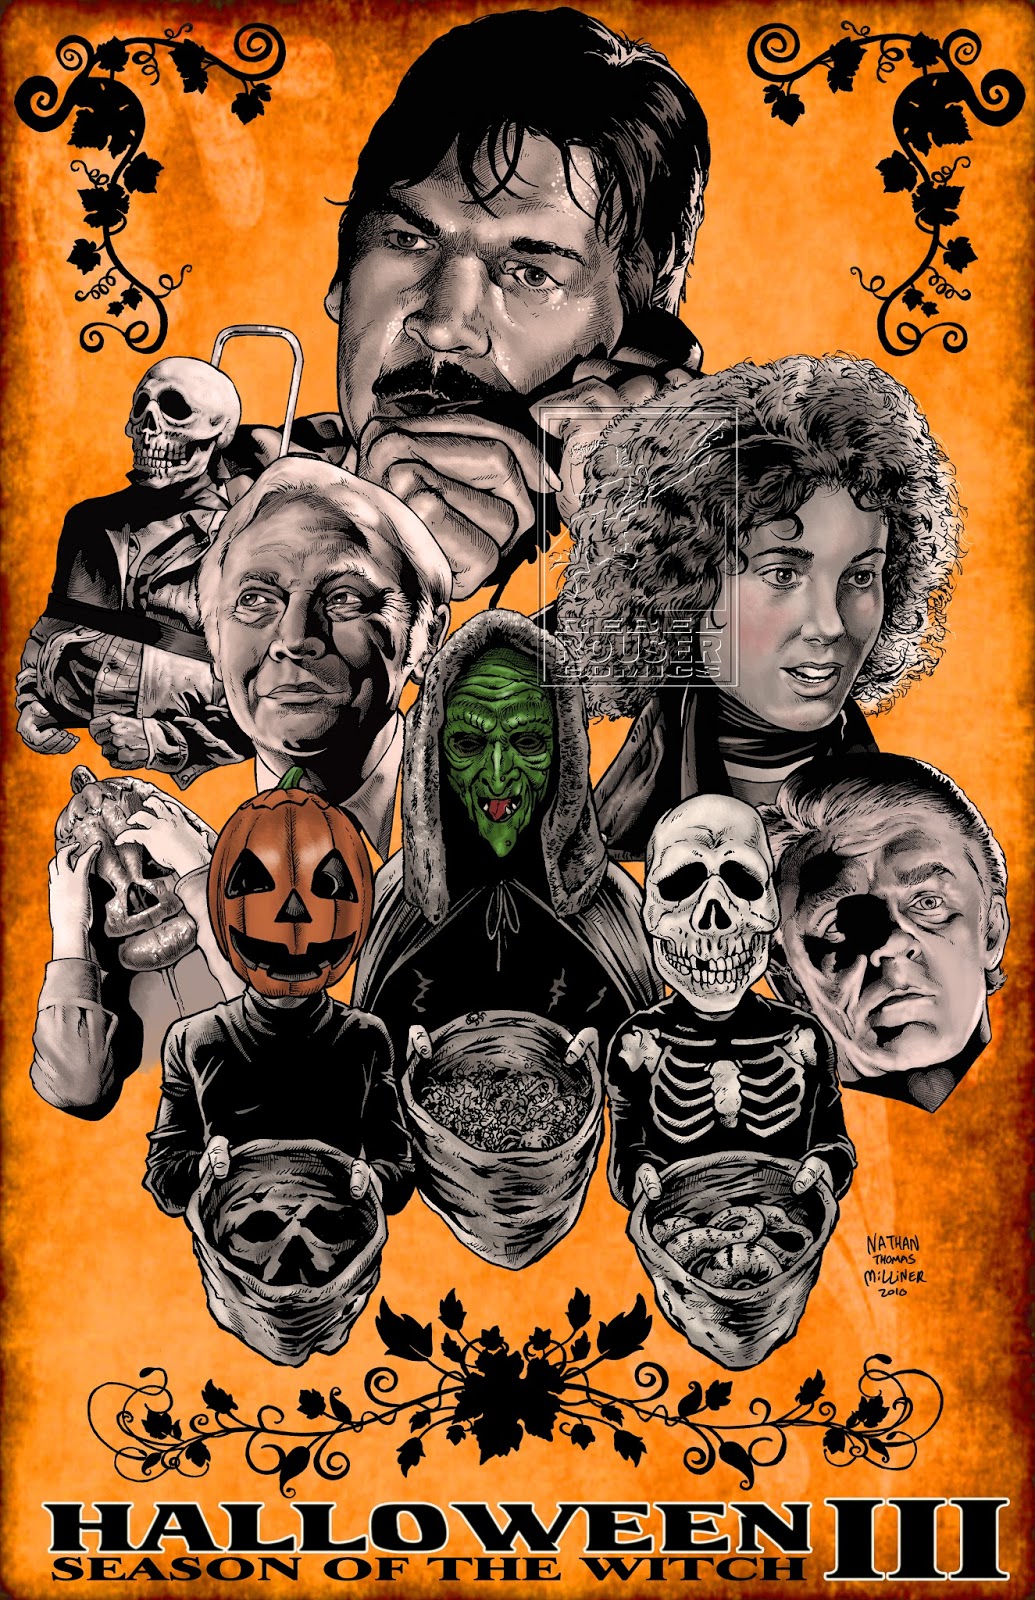 The Horrors of Halloween: HALLOWEEN III SEASON OF THE WITCH Artwork / Posters and Video Mixtape